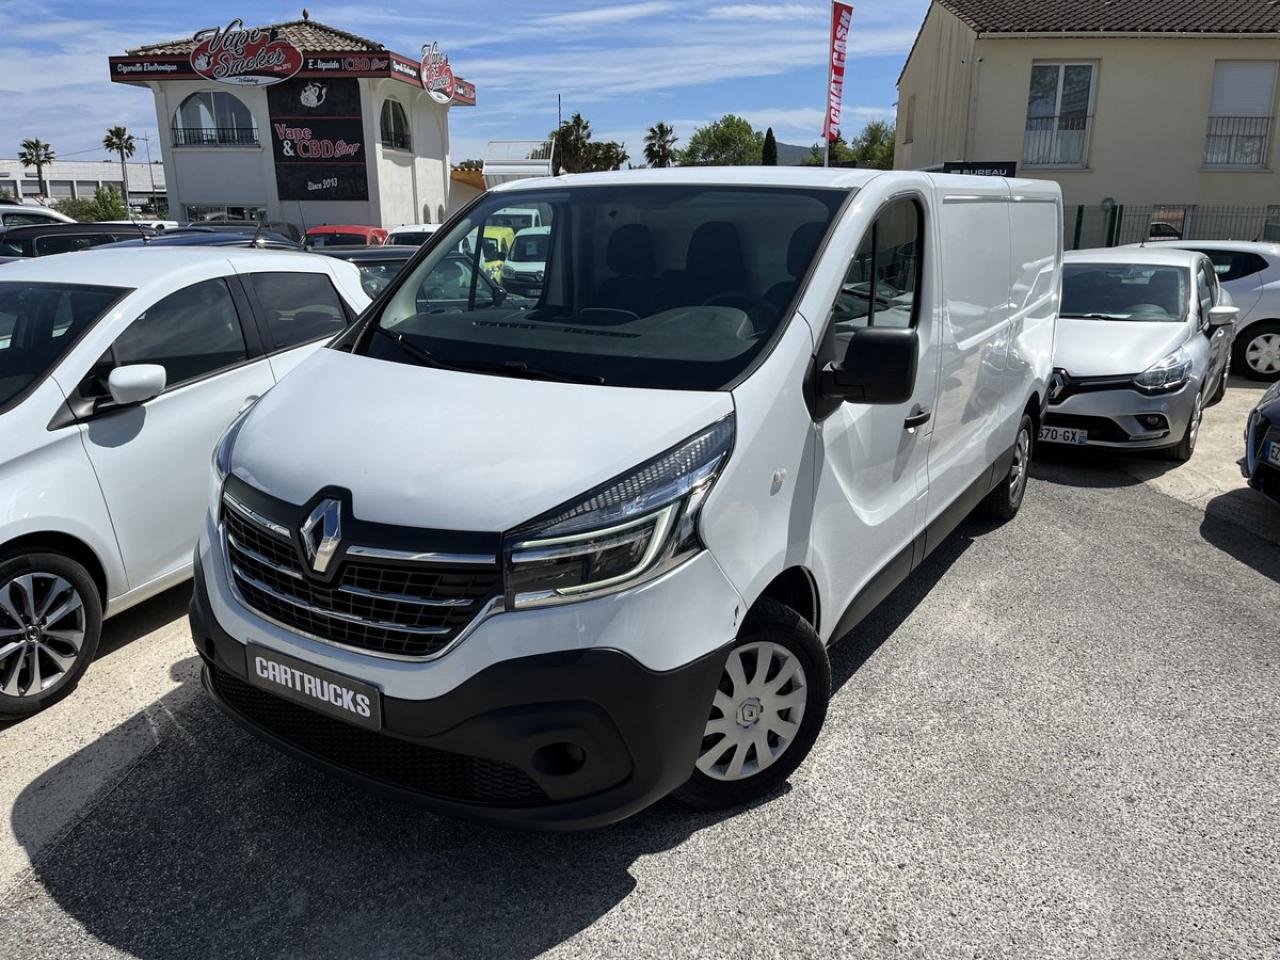 CARTRUCKS - RENAULT-TRAFIC-Trafic L2H1 1300 Kg 2.0 dCi - 120 - S&S III  FOURGON Fourgon Grand Confort L2H1 PHASE 2